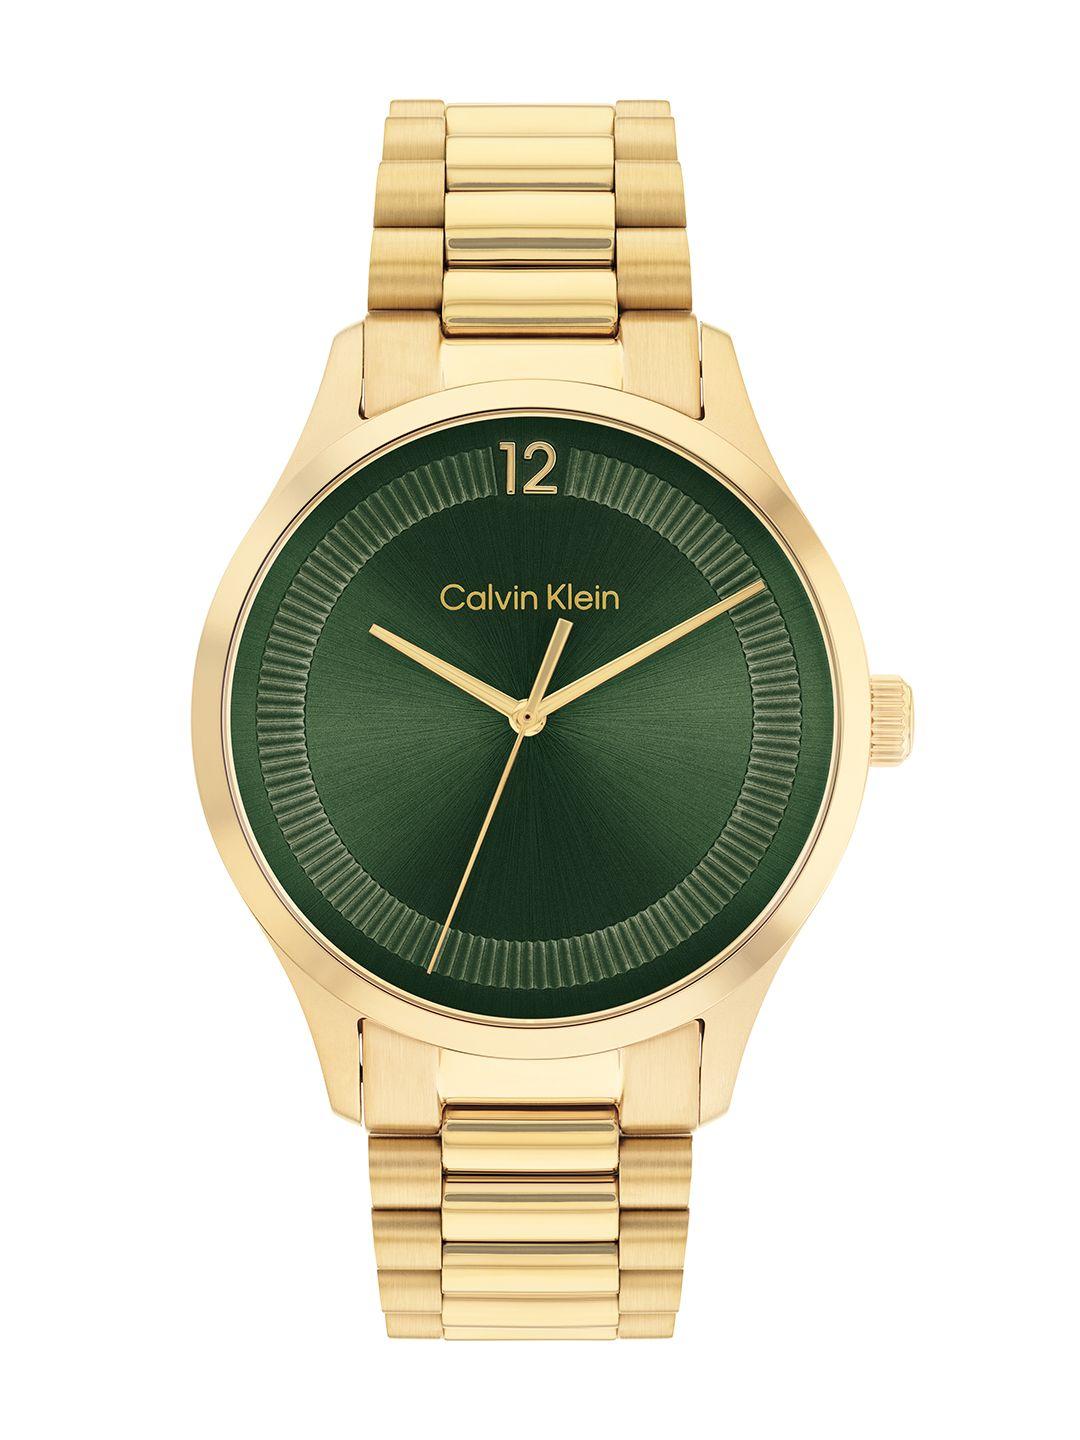 calvin klein unisex solid dial & stainless steel bracelet style analogue watch 25200229